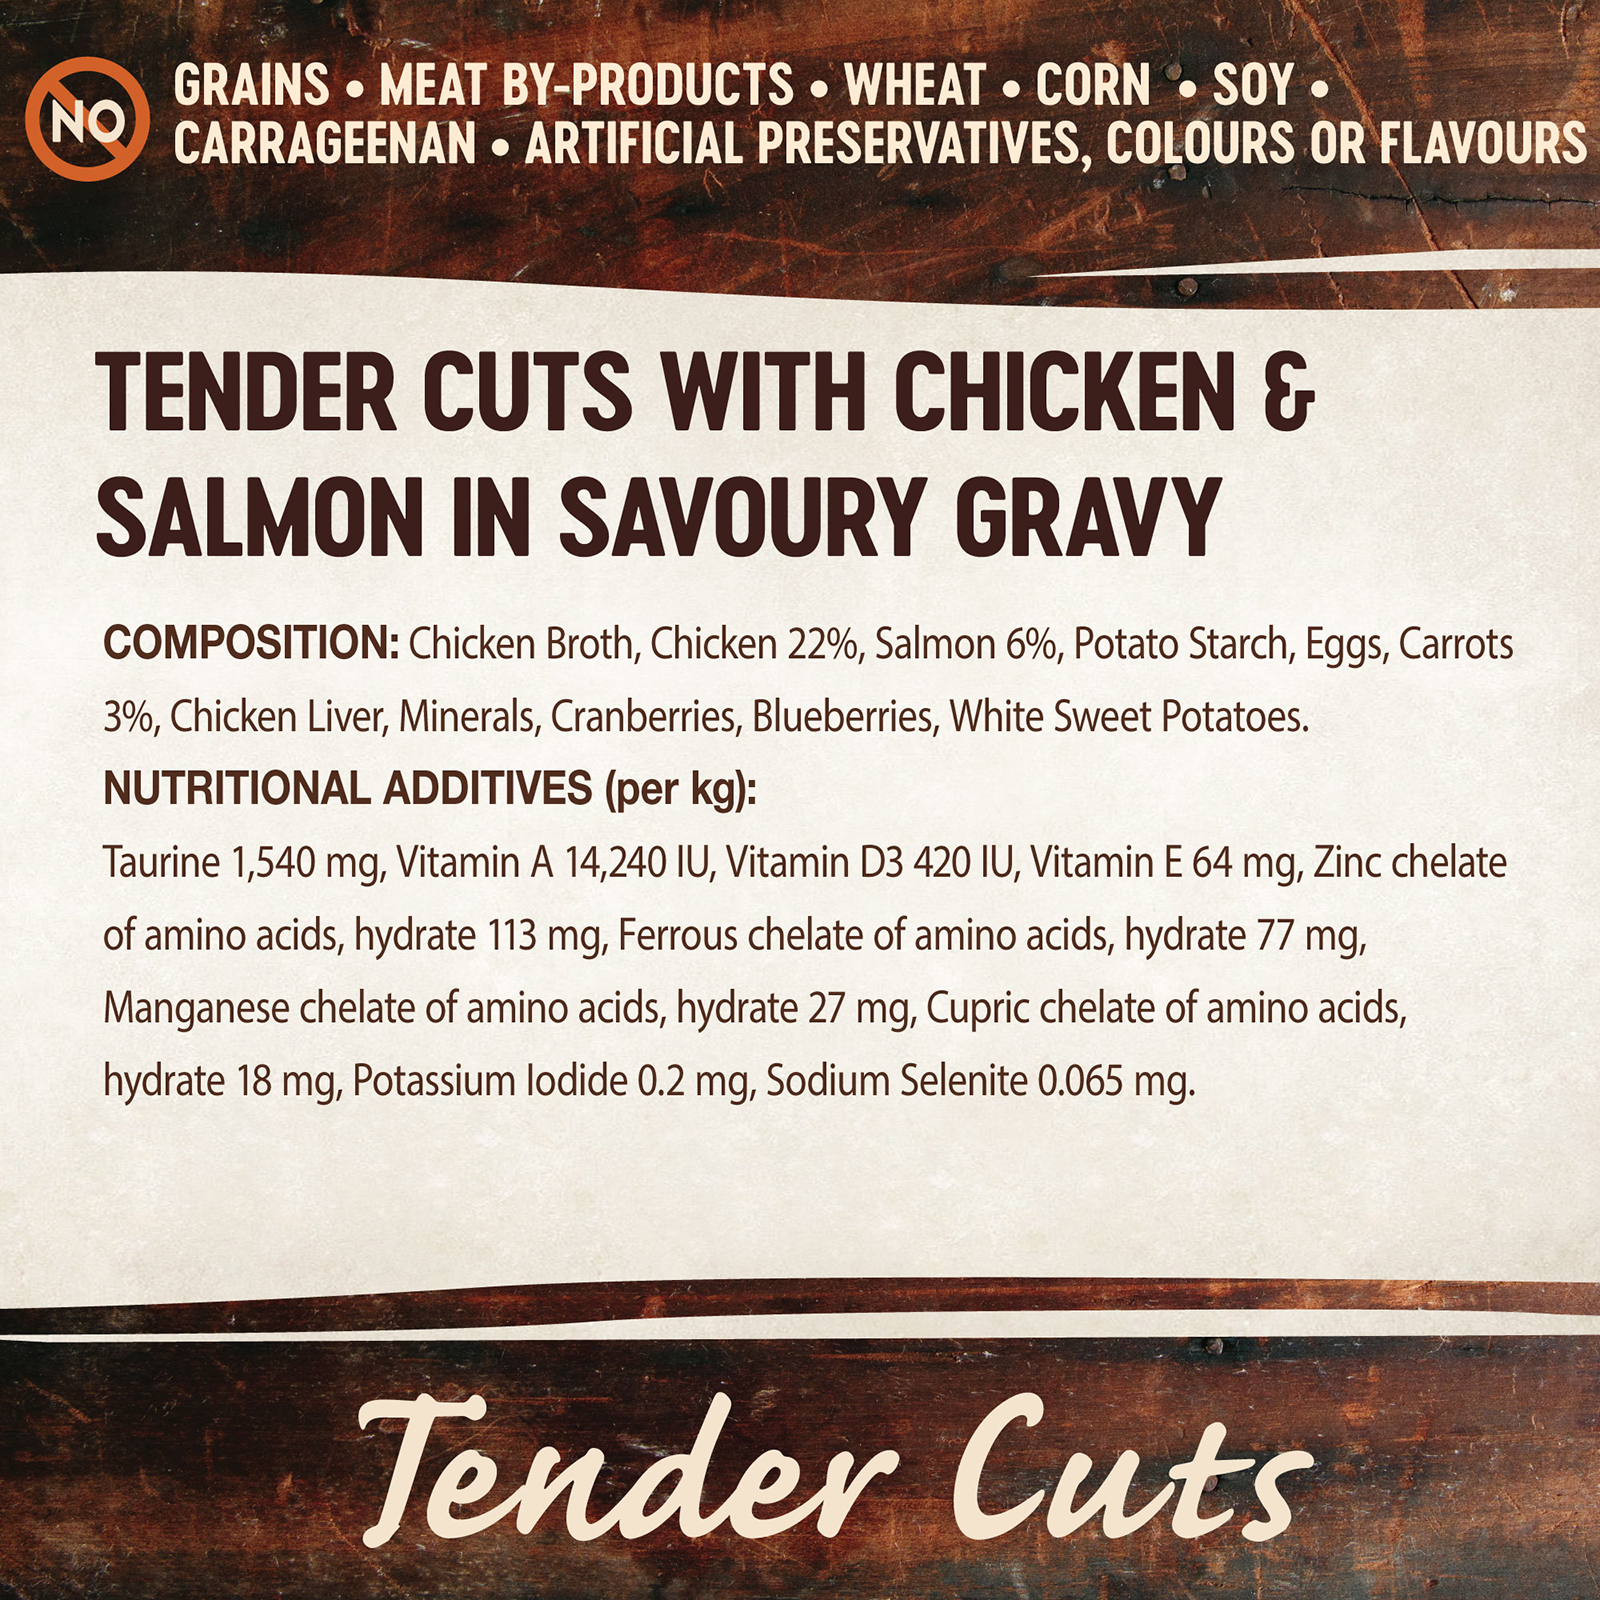 Wellness CORE Tender Cuts Cat Food Pouch Adult With Chicken & Salmon in Savoury Gravy